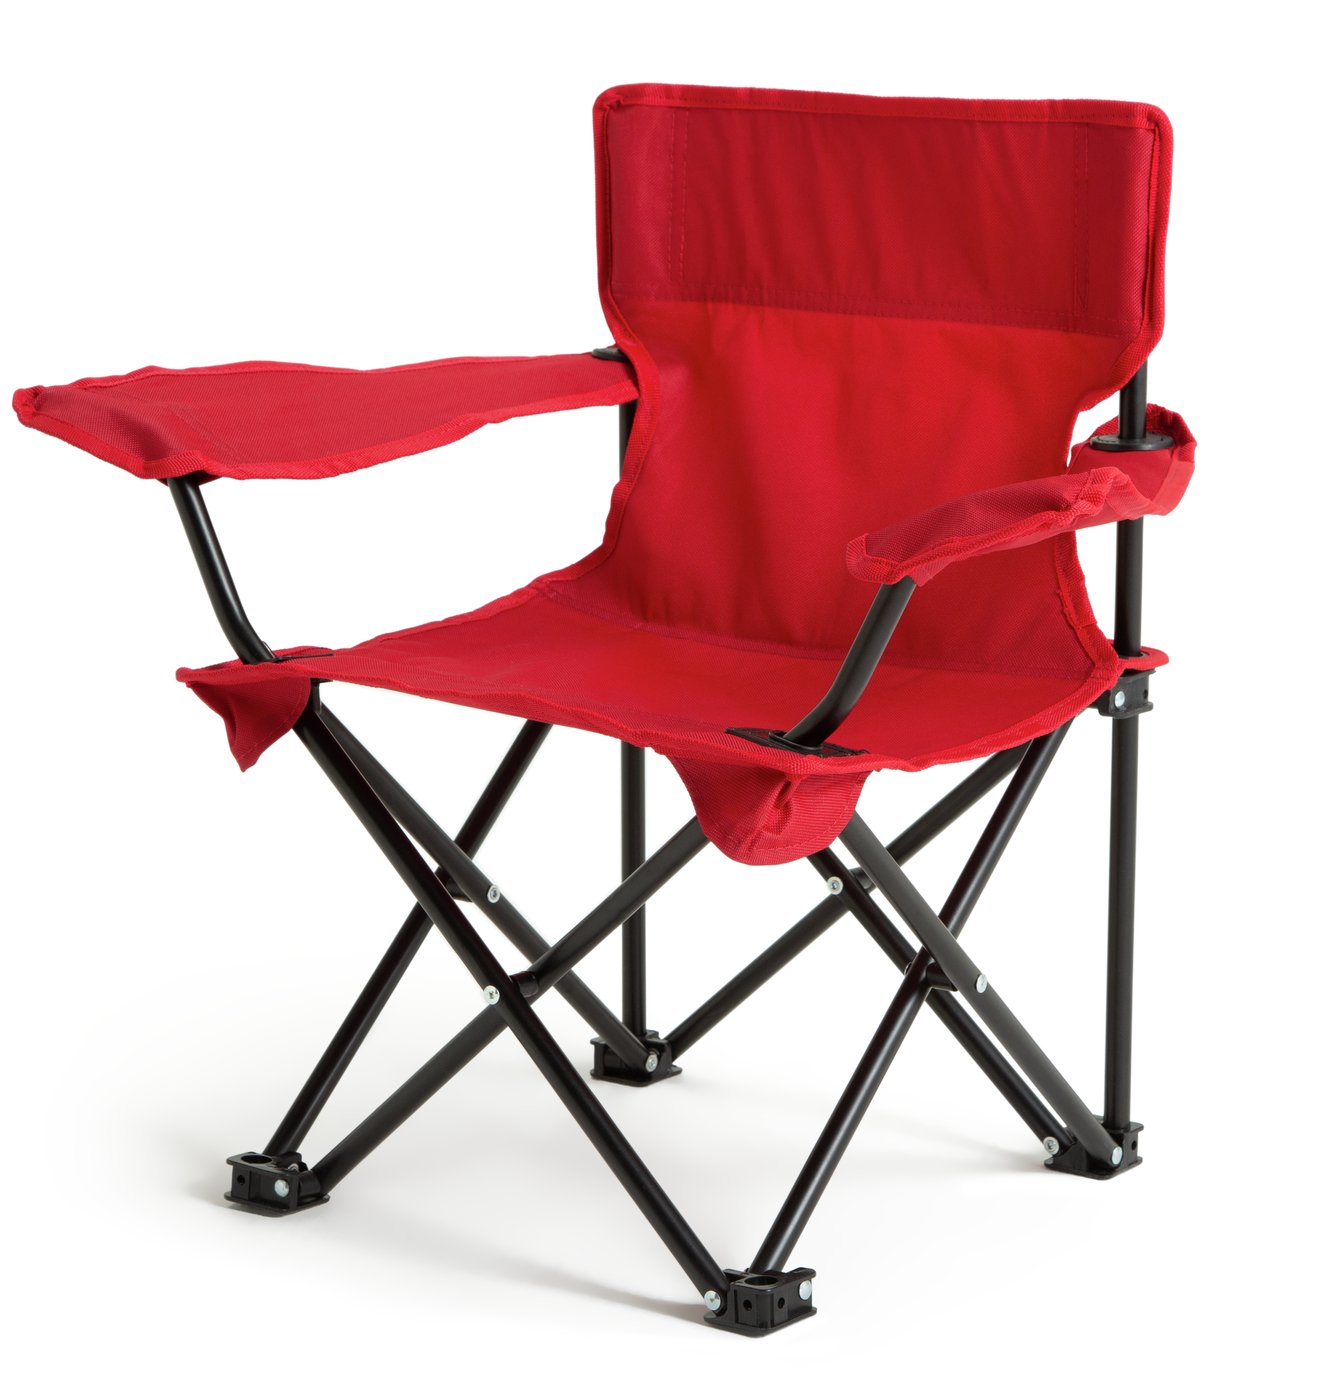 Pro Action Polyester Kids Folding Camping Chair - Red